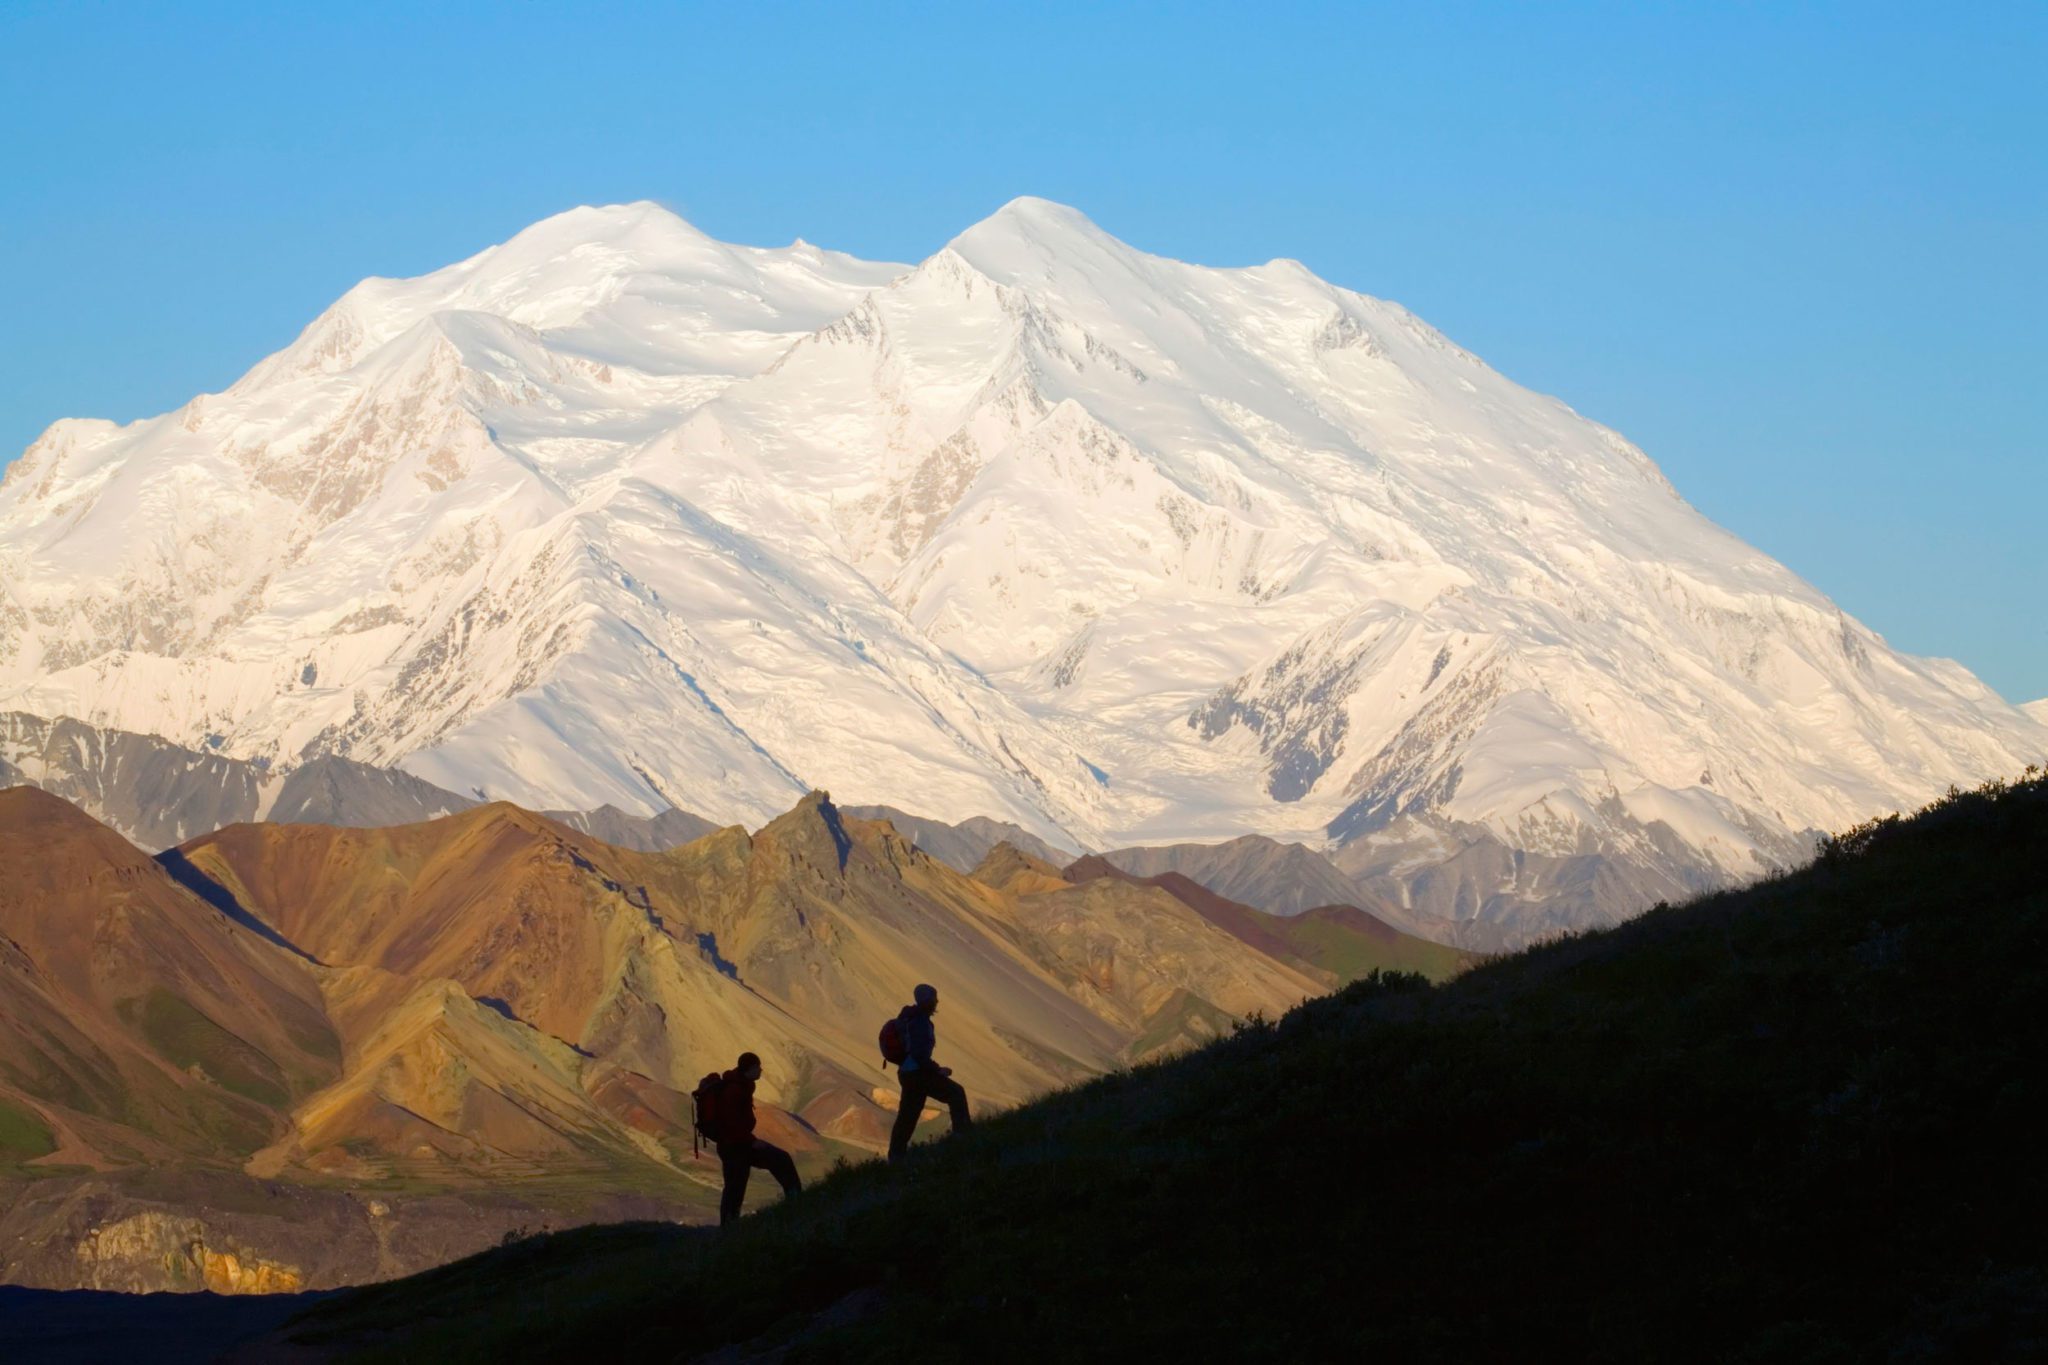 denali park tours from anchorage